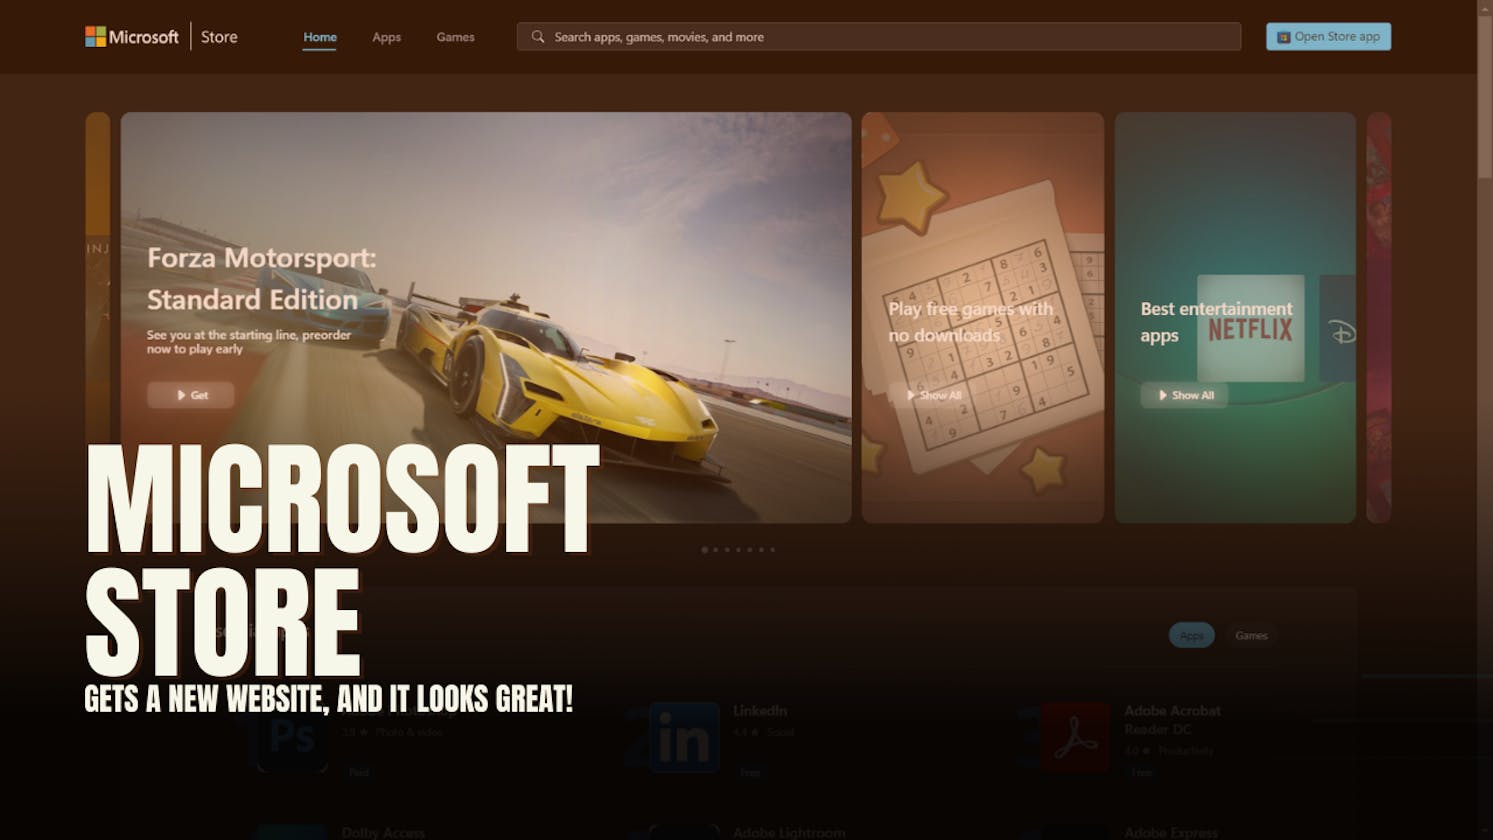 Microsoft Store gets a new website, and it looks great!